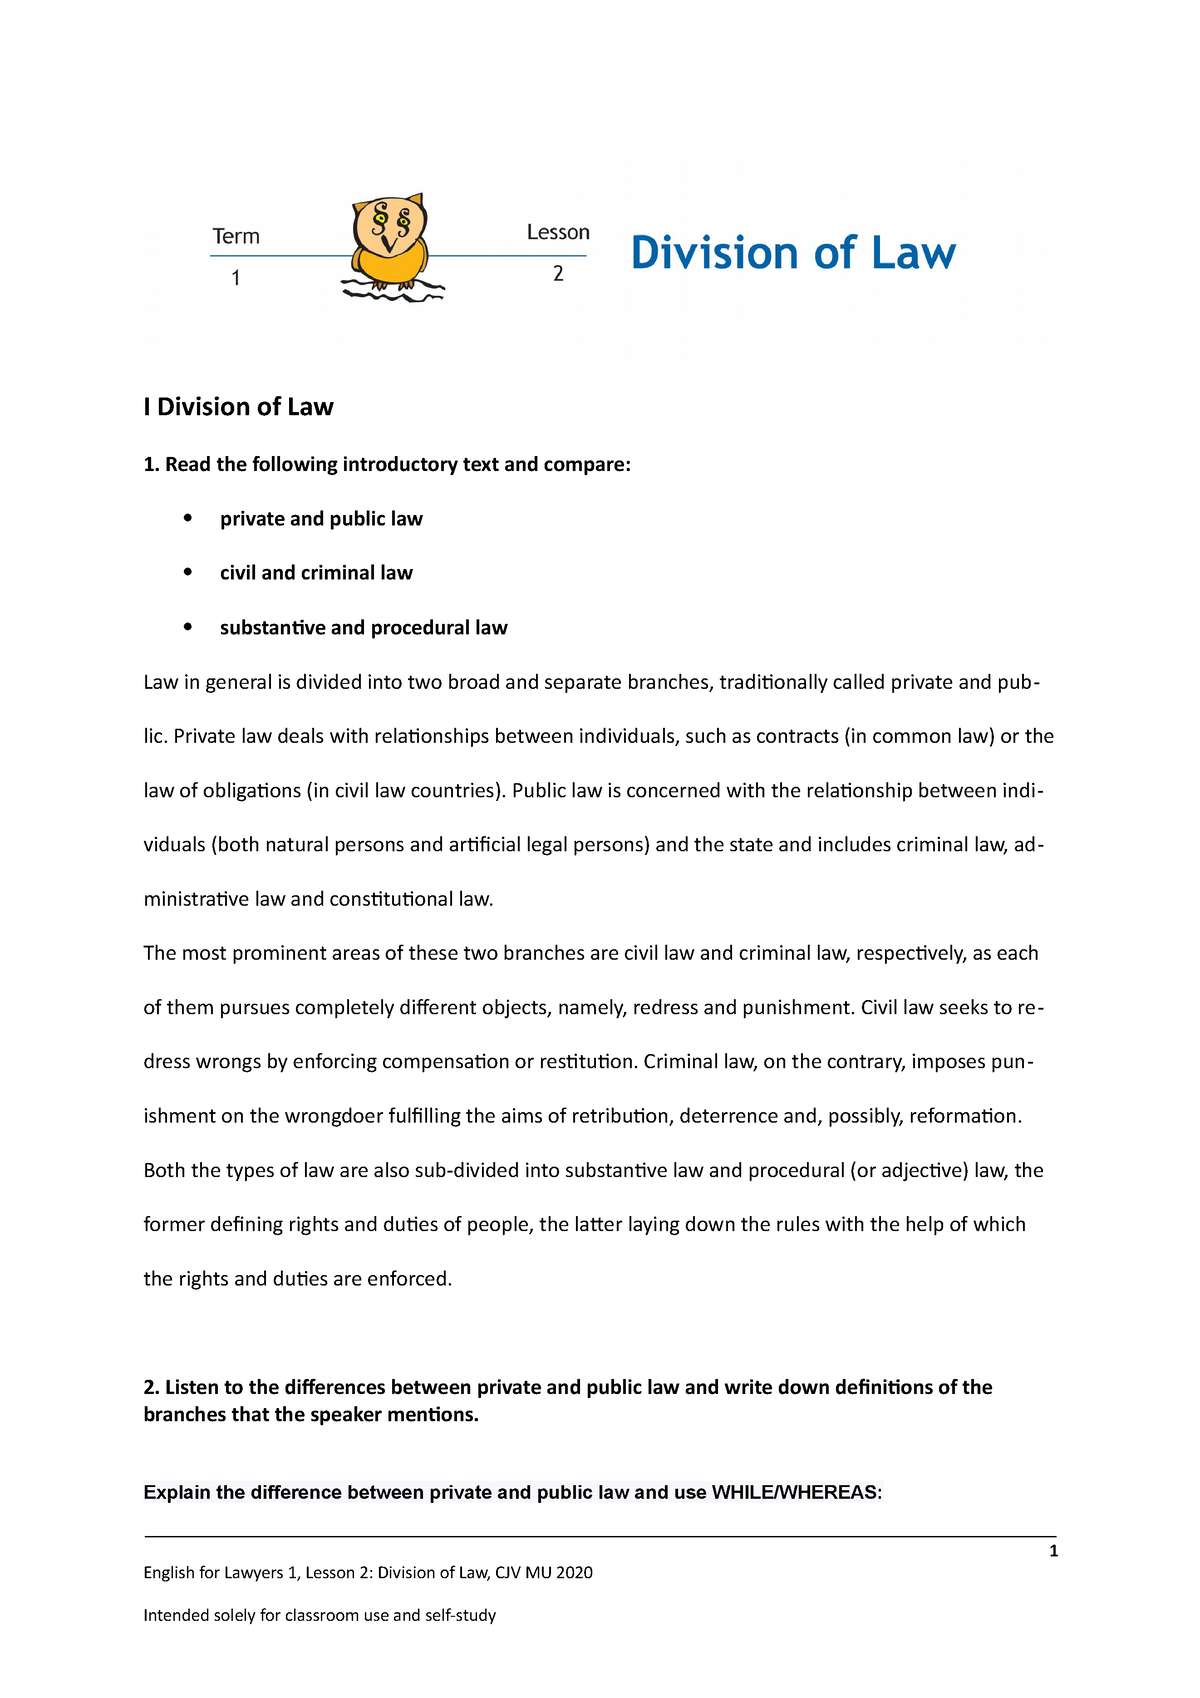 division of law assignment